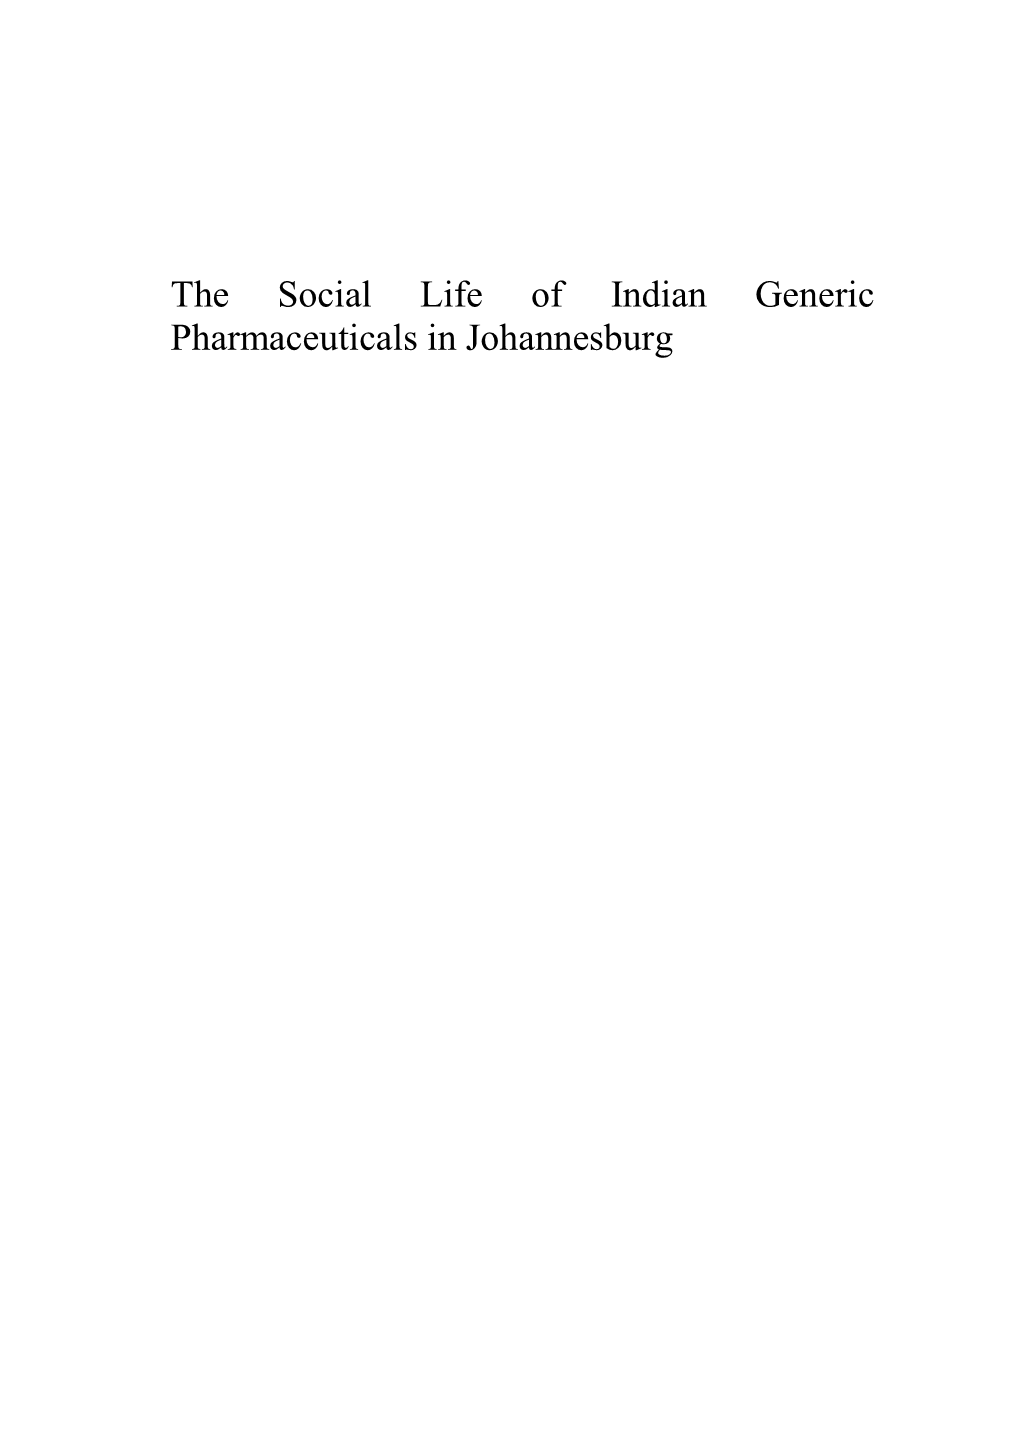 The Social Life of Indian Generic Pharmaceuticals in Johannesburg